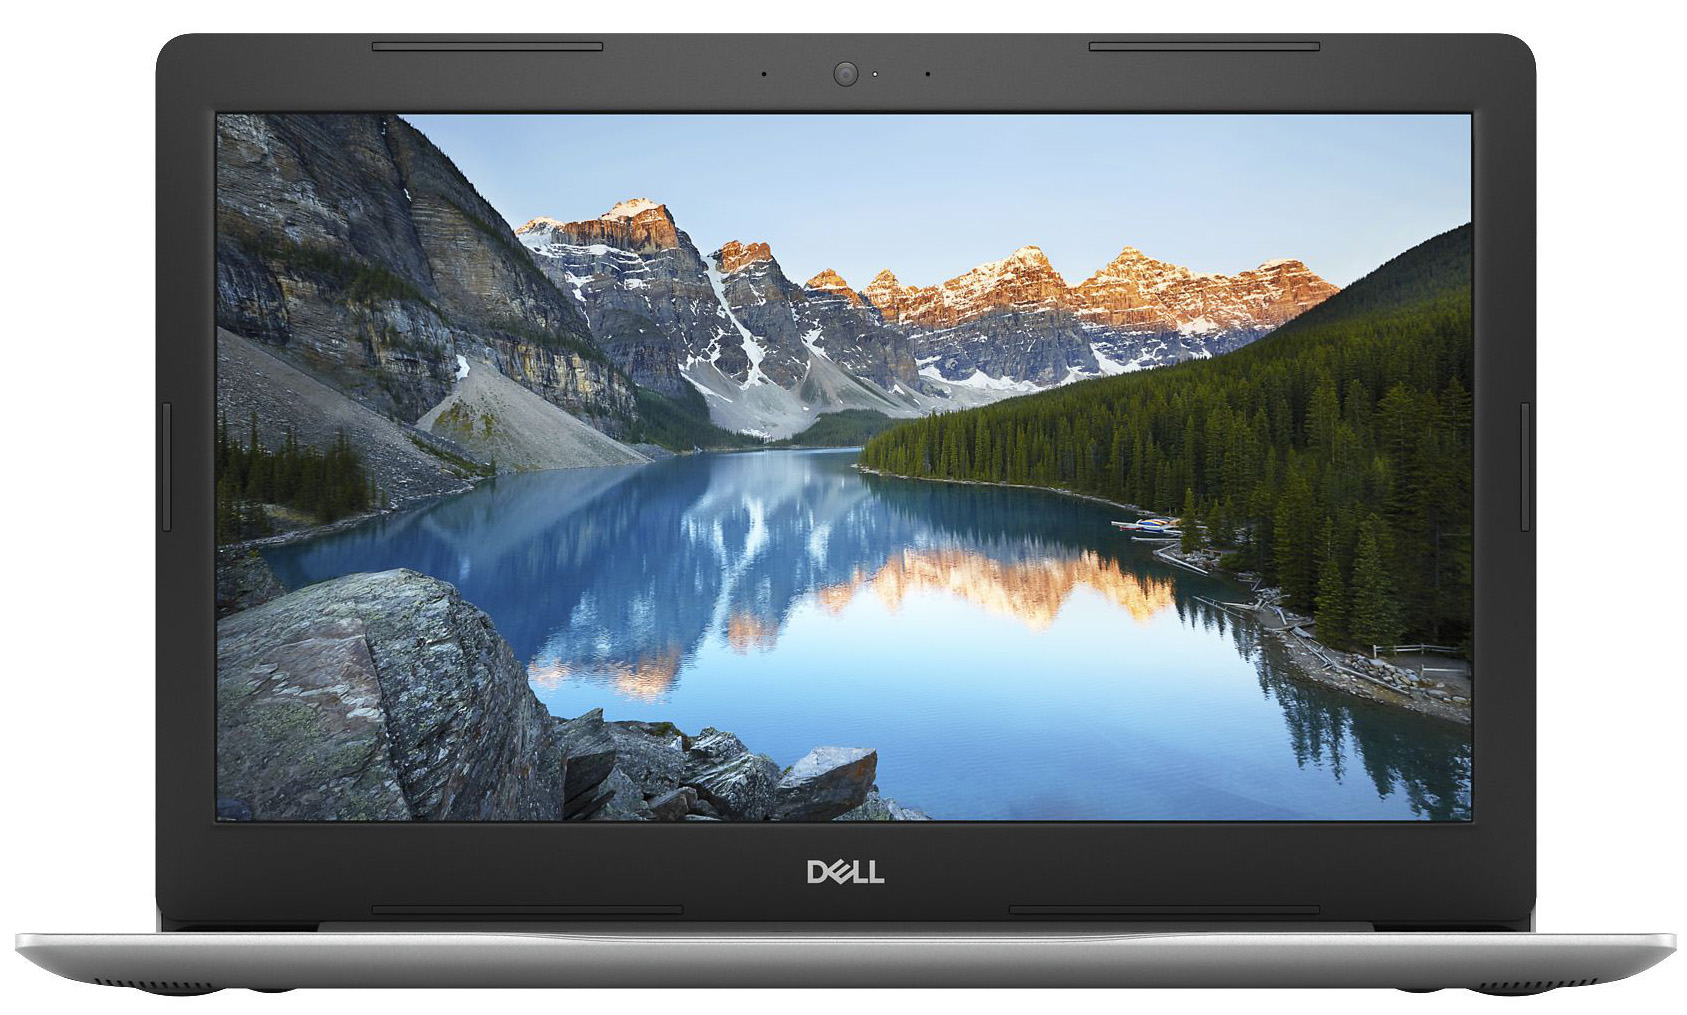 Dell Inspiron 15 5570 - Specs, Tests, and Prices | LaptopMedia.com